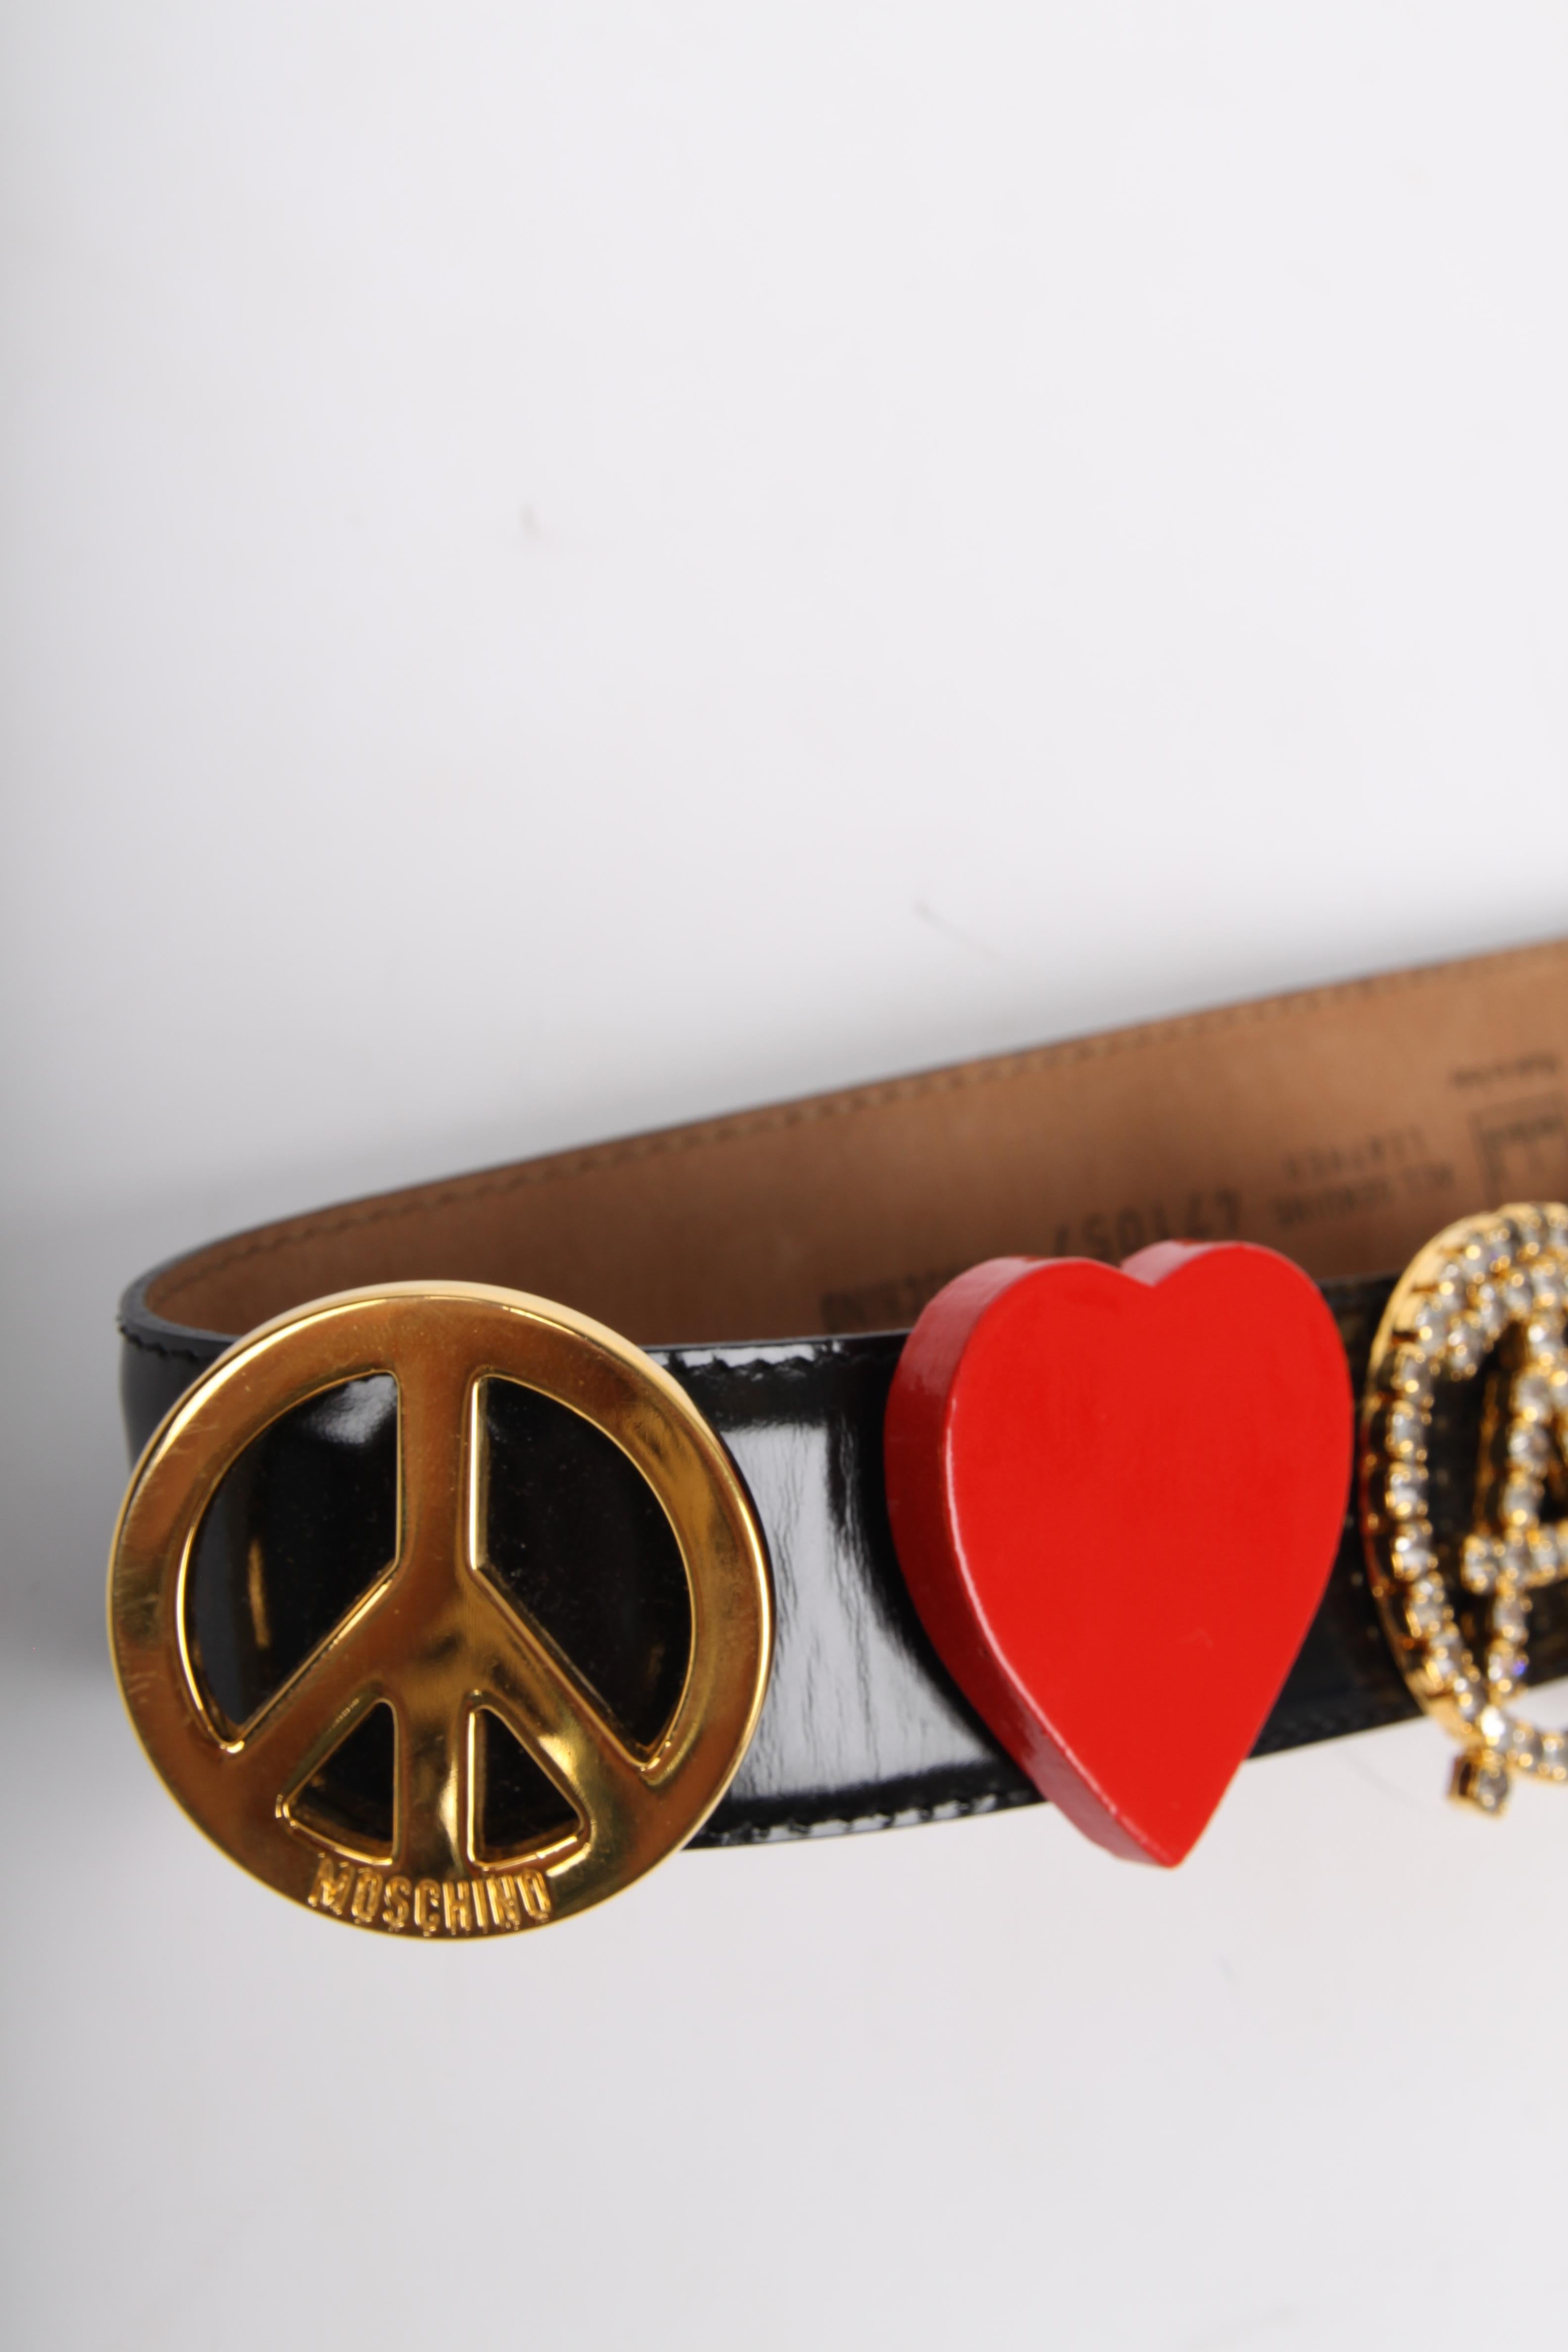 Moschino Vintage black Mini Belt Bag with Peace / Love Belt In Good Condition For Sale In Baarn, NL